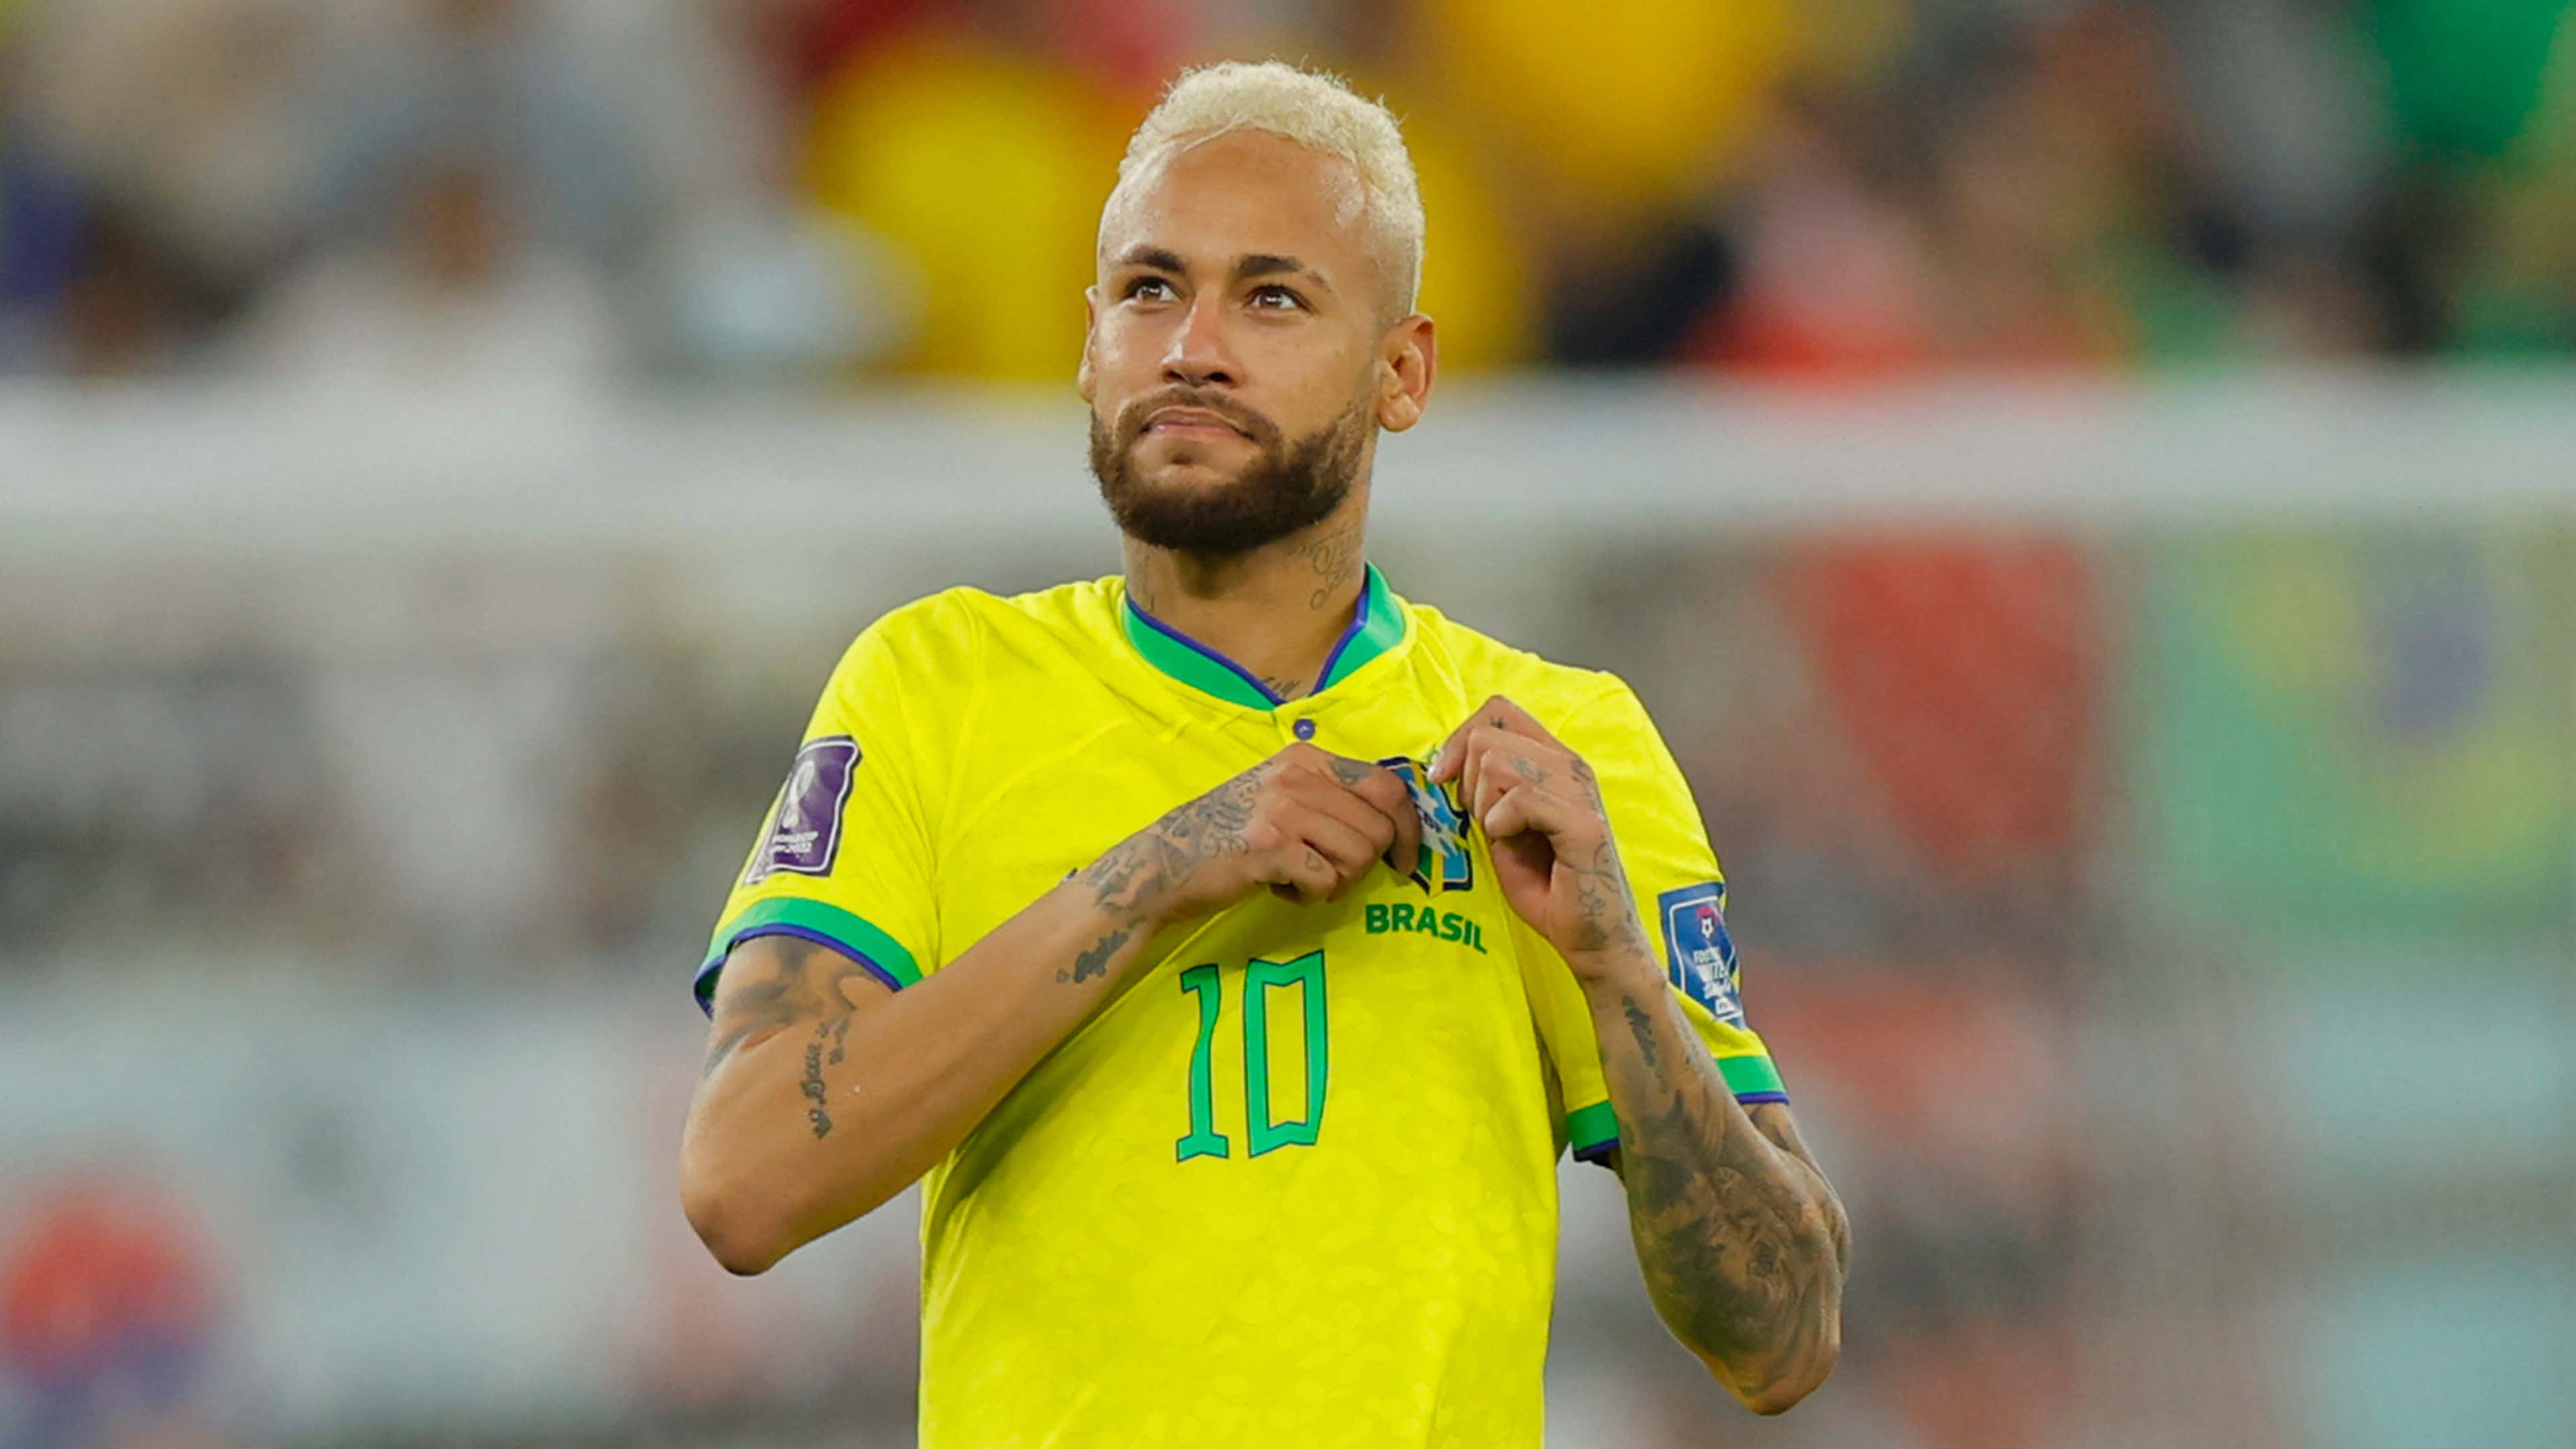 Is this the end for Neymar? From World Cup legend to loser in 10 minutes